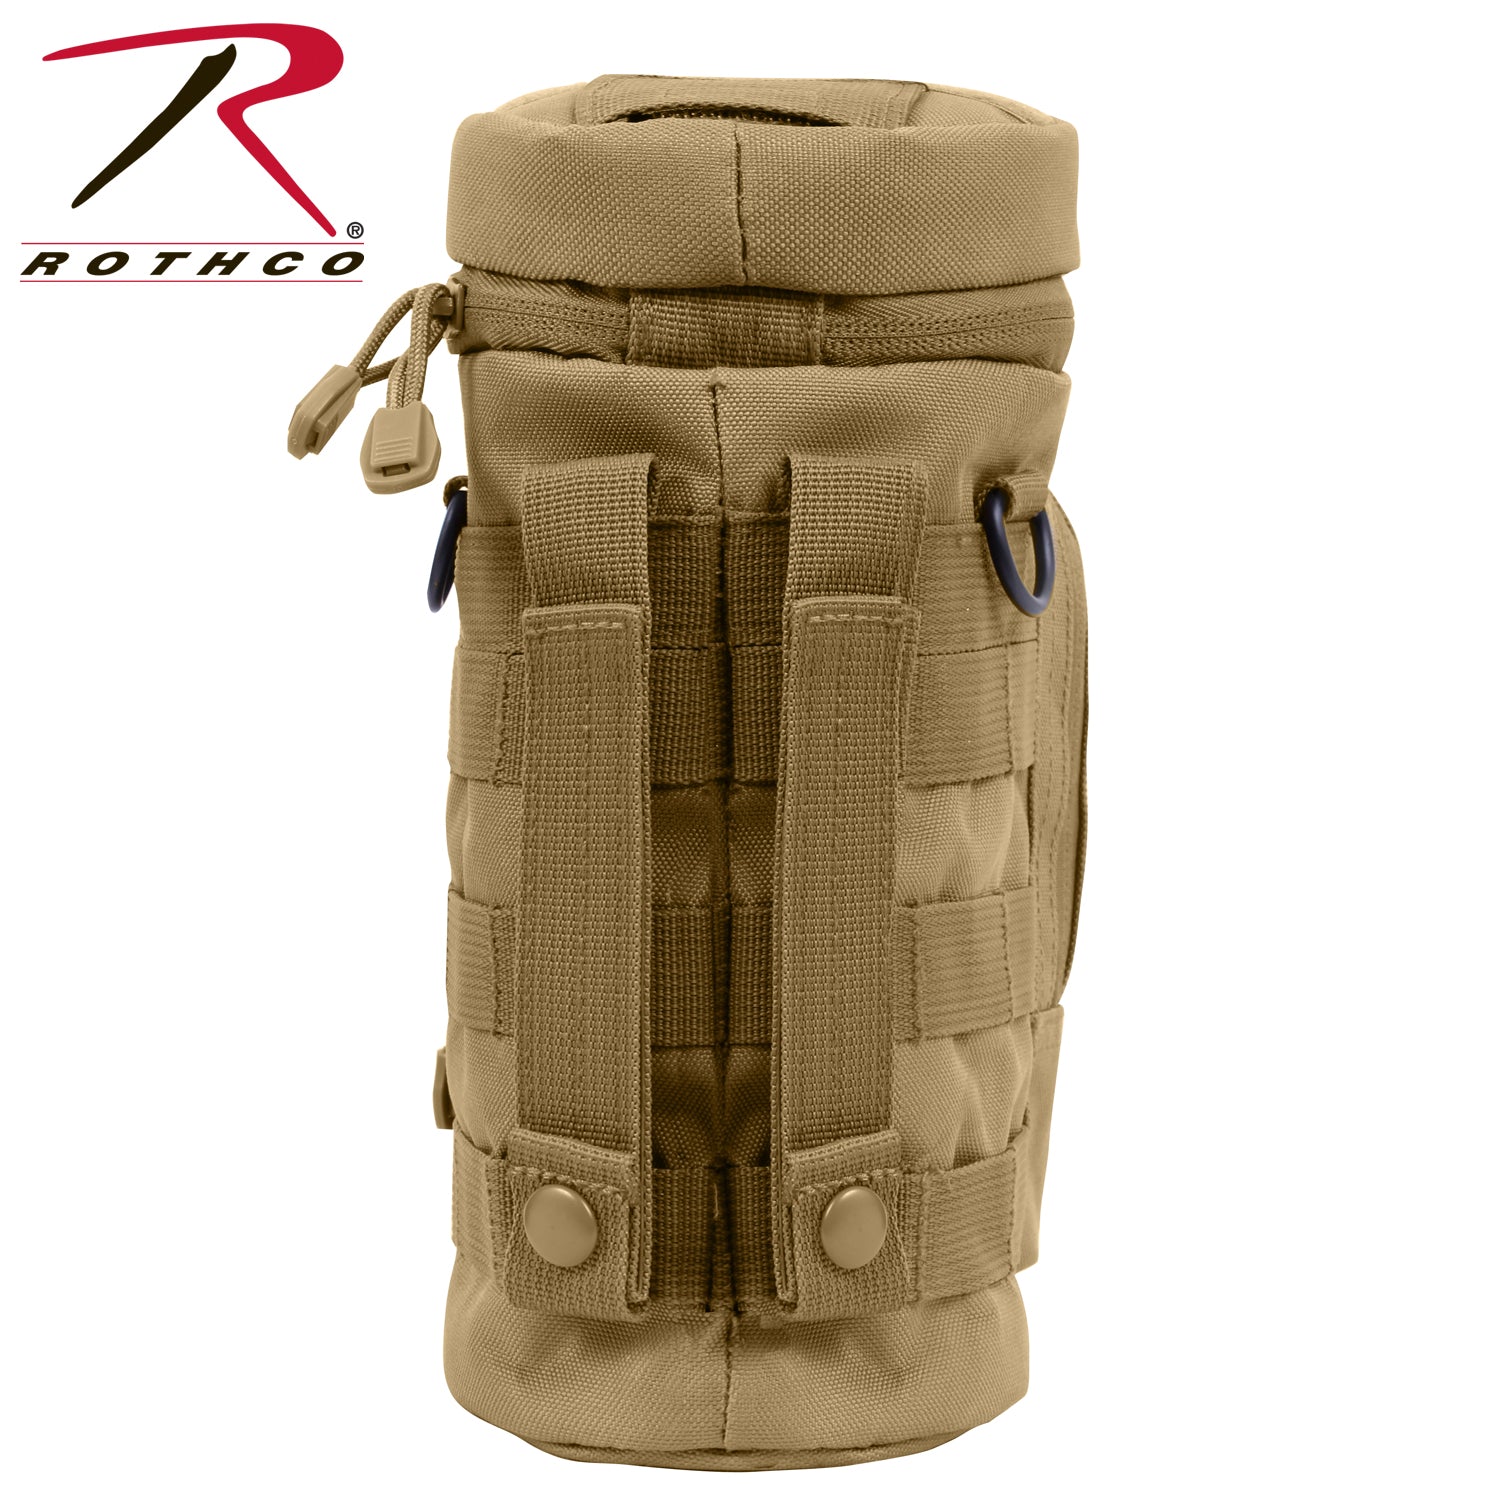 Rothco MOLLE Compatible Water Pouch